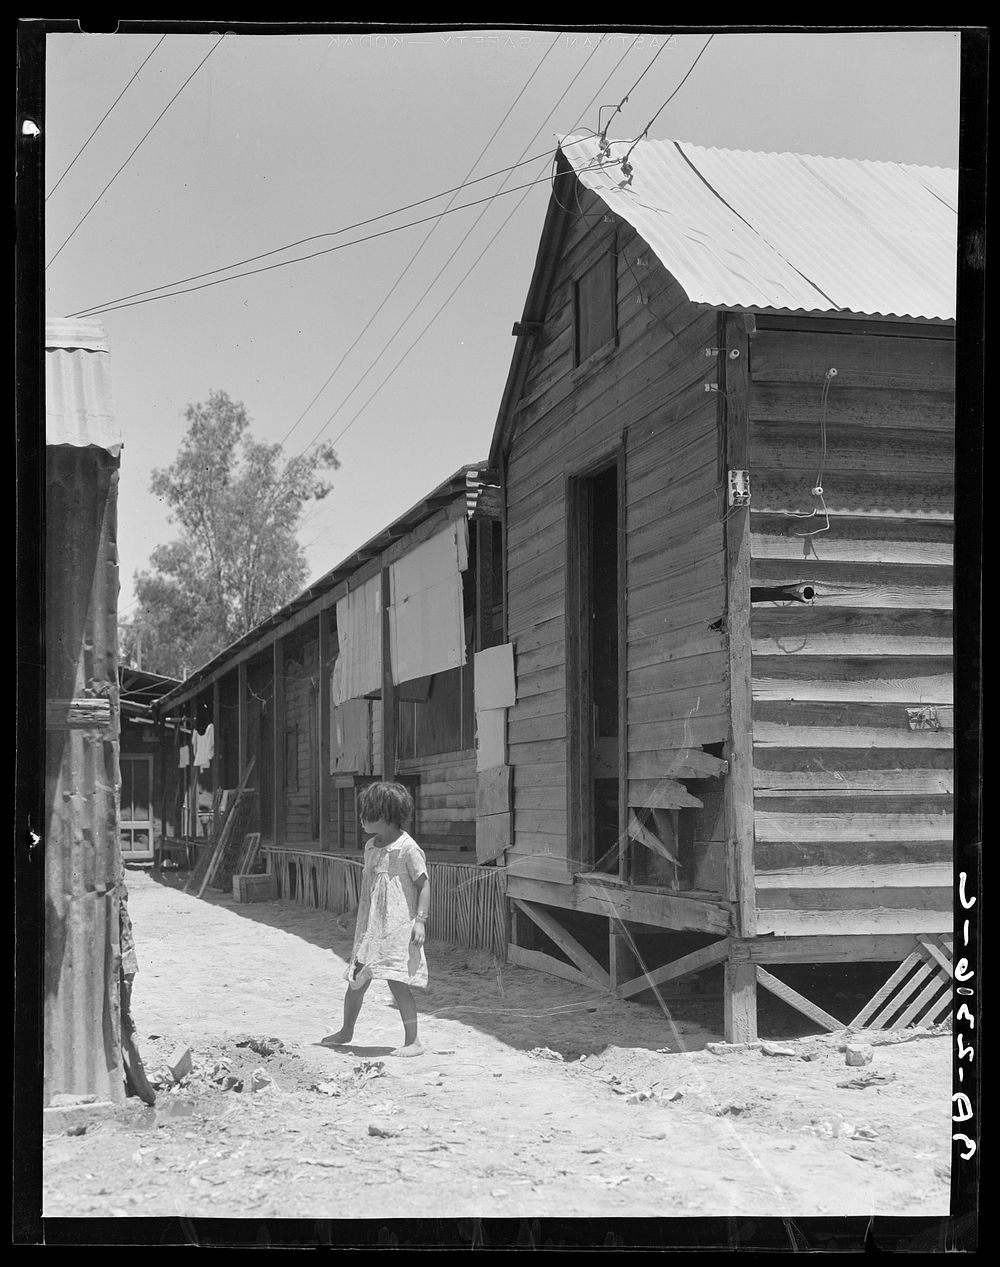 Home of Mexican field laborers. Brawley, Imperial Valley, California. Sourced from the Library of Congress.